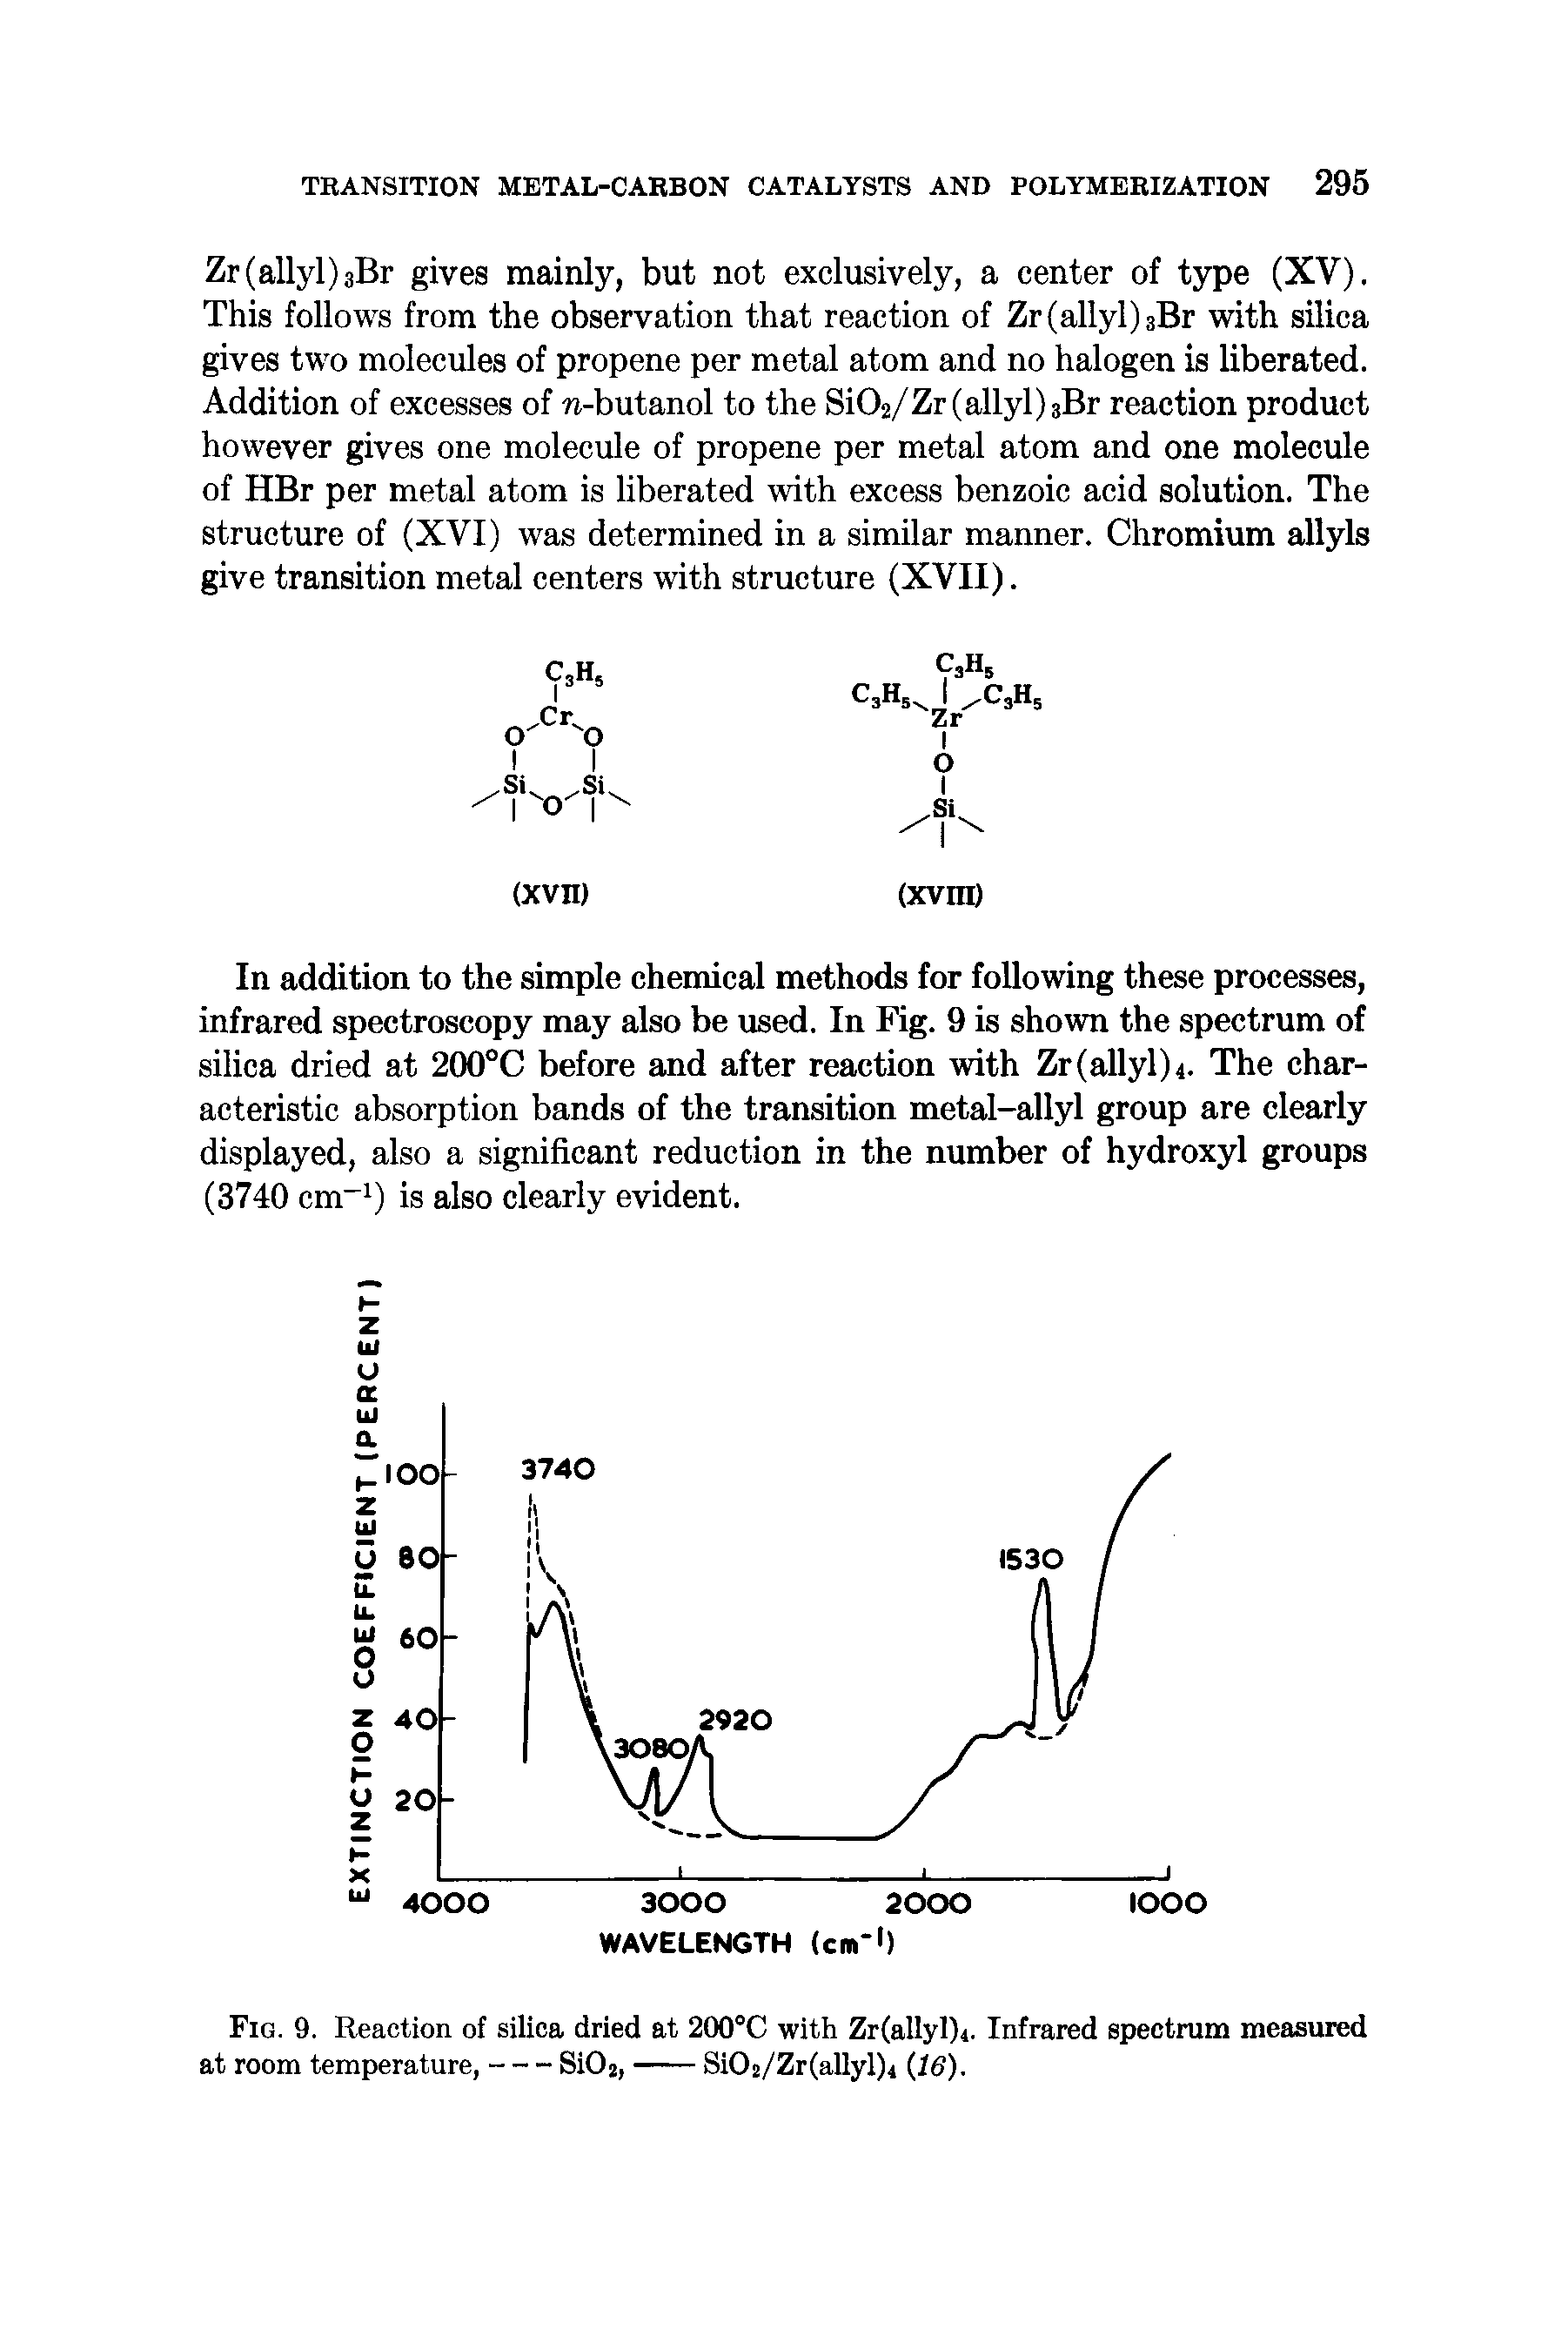 Fig. 9. Reaction of silica dried at 200°C with Zrfallylh. Infrared spectrum measured at room temperature,---SiCb,----Si02/Zr(allyl)i (16).